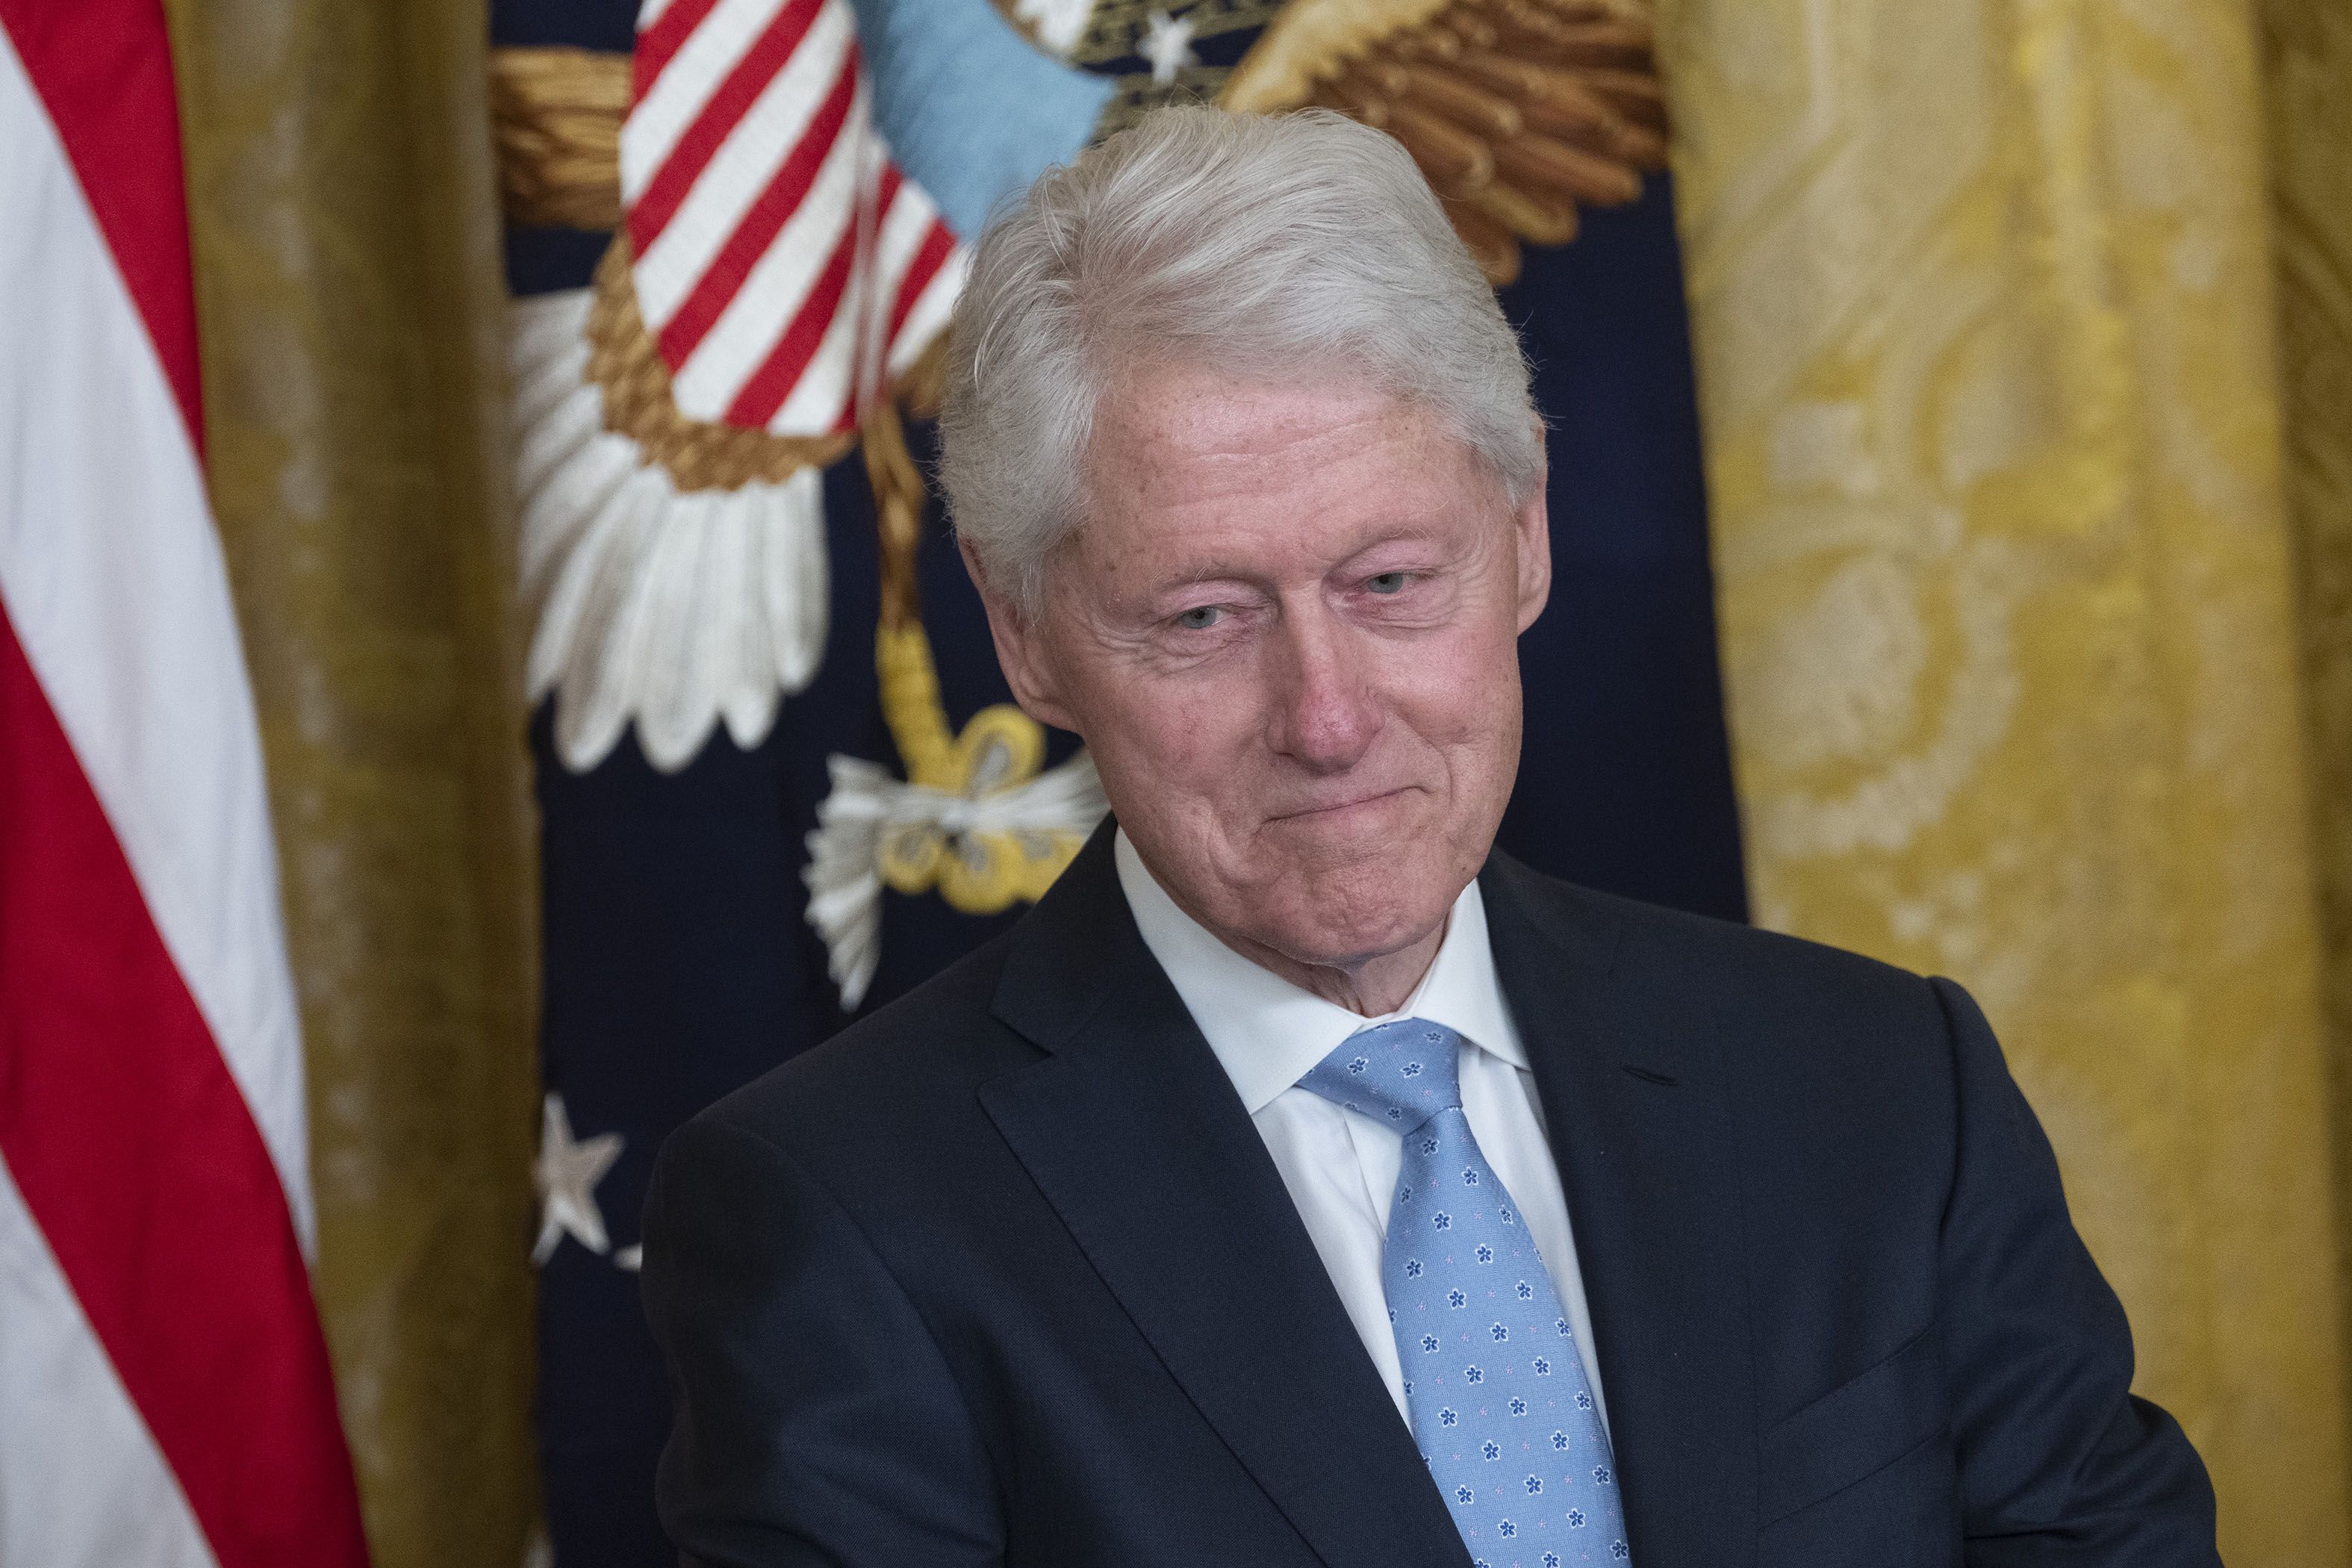 Bill Clinton at the 30th Anniversary Of The Family And Medical Leave Act